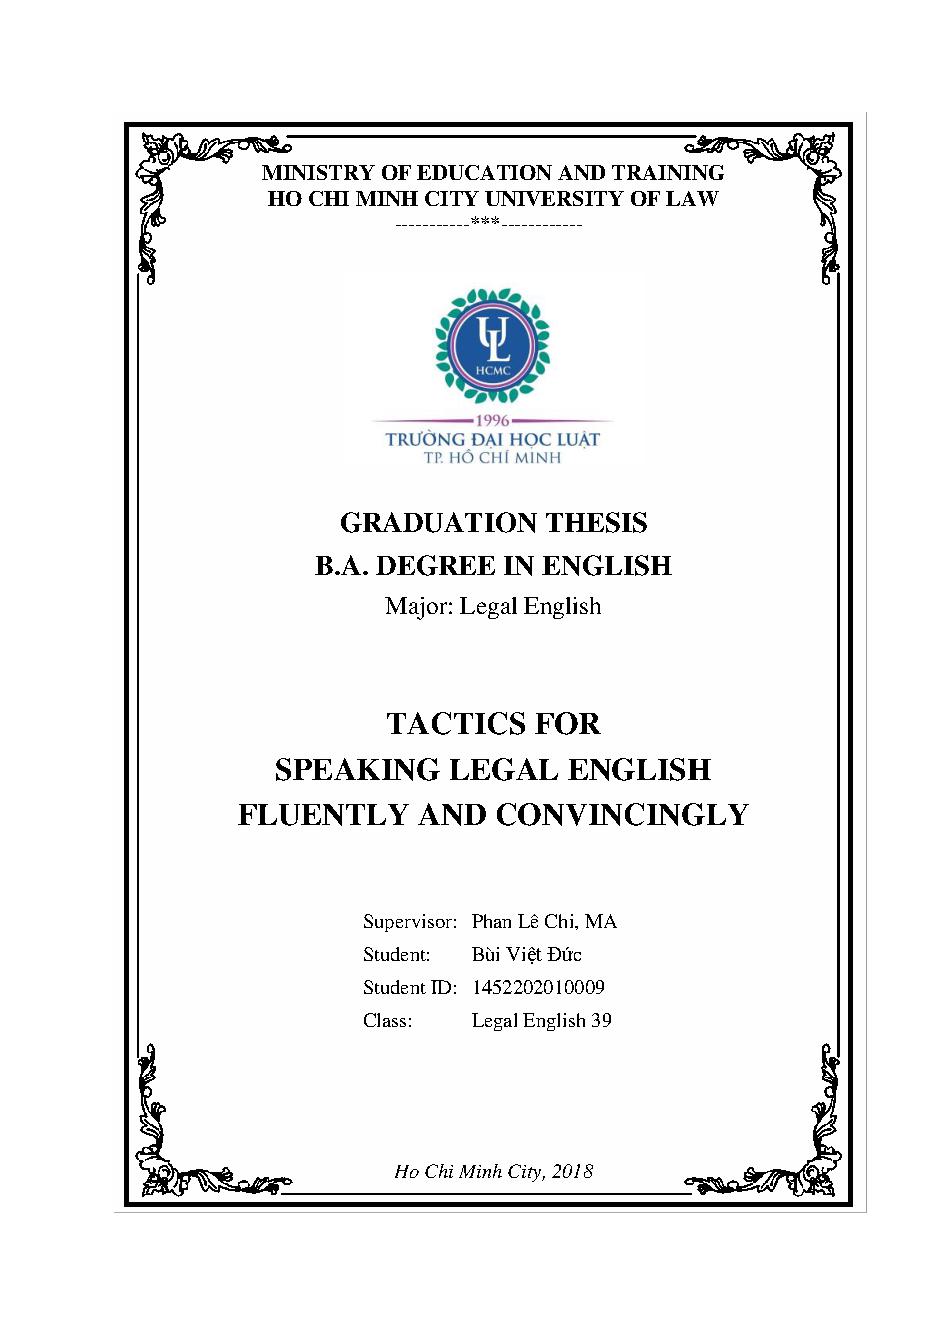 Tactics for speaking legal english fluently and convincingly